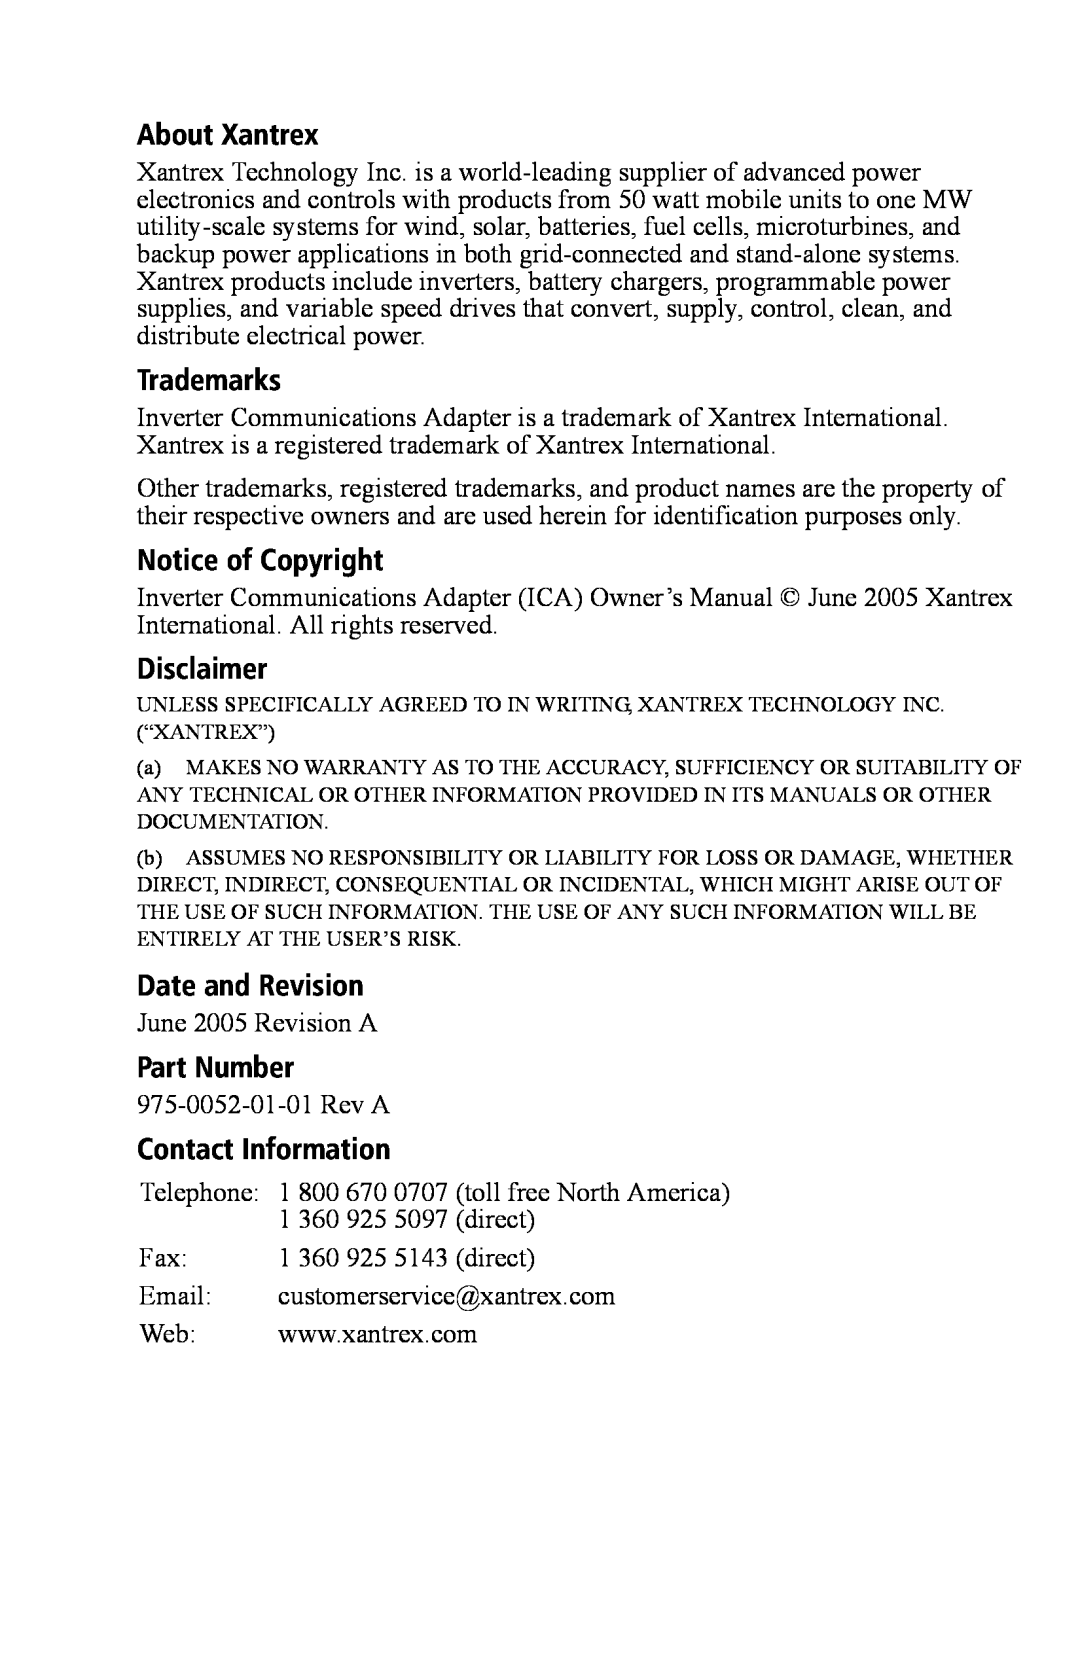 Xantrex Technology Inverter Communications Adapter About Xantrex, Trademarks, Notice of Copyright, Disclaimer, Part Number 